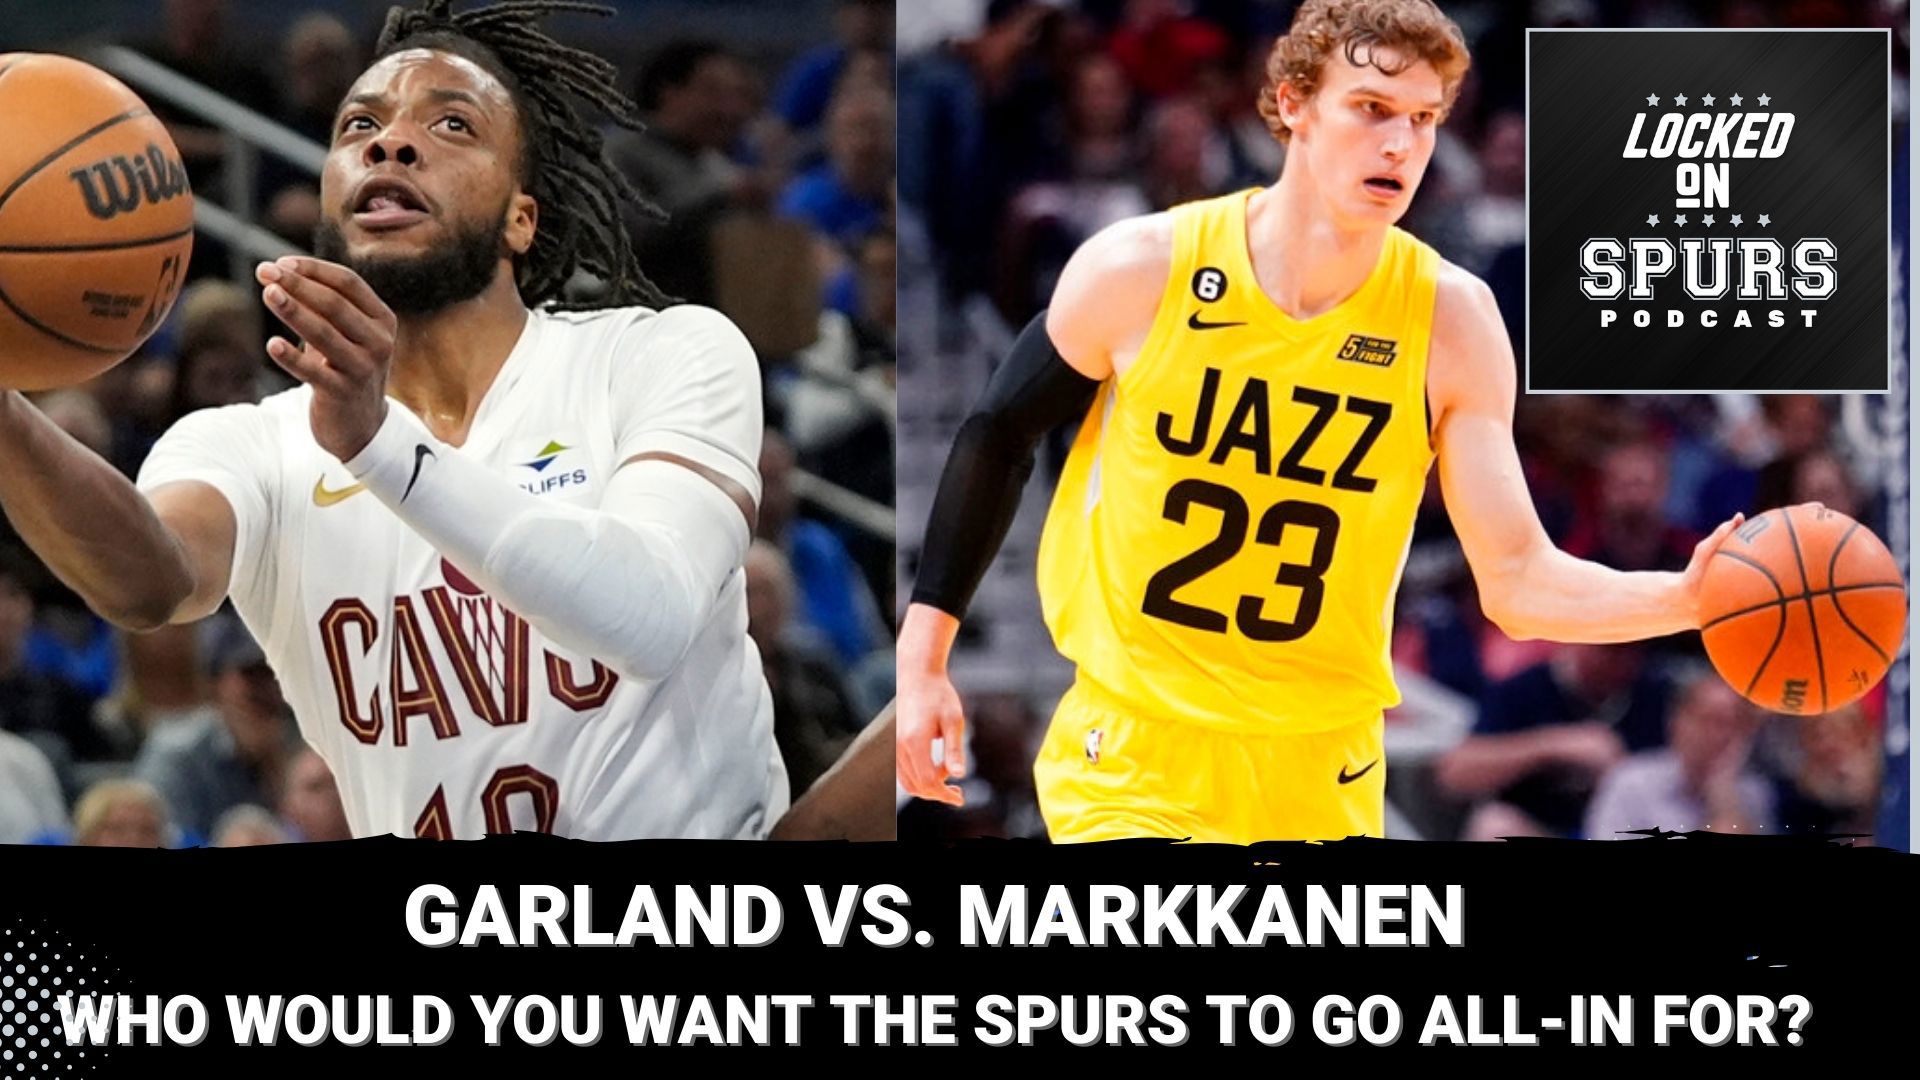 Who would it be if you could pick one player to chase - Garland or Markkanen?